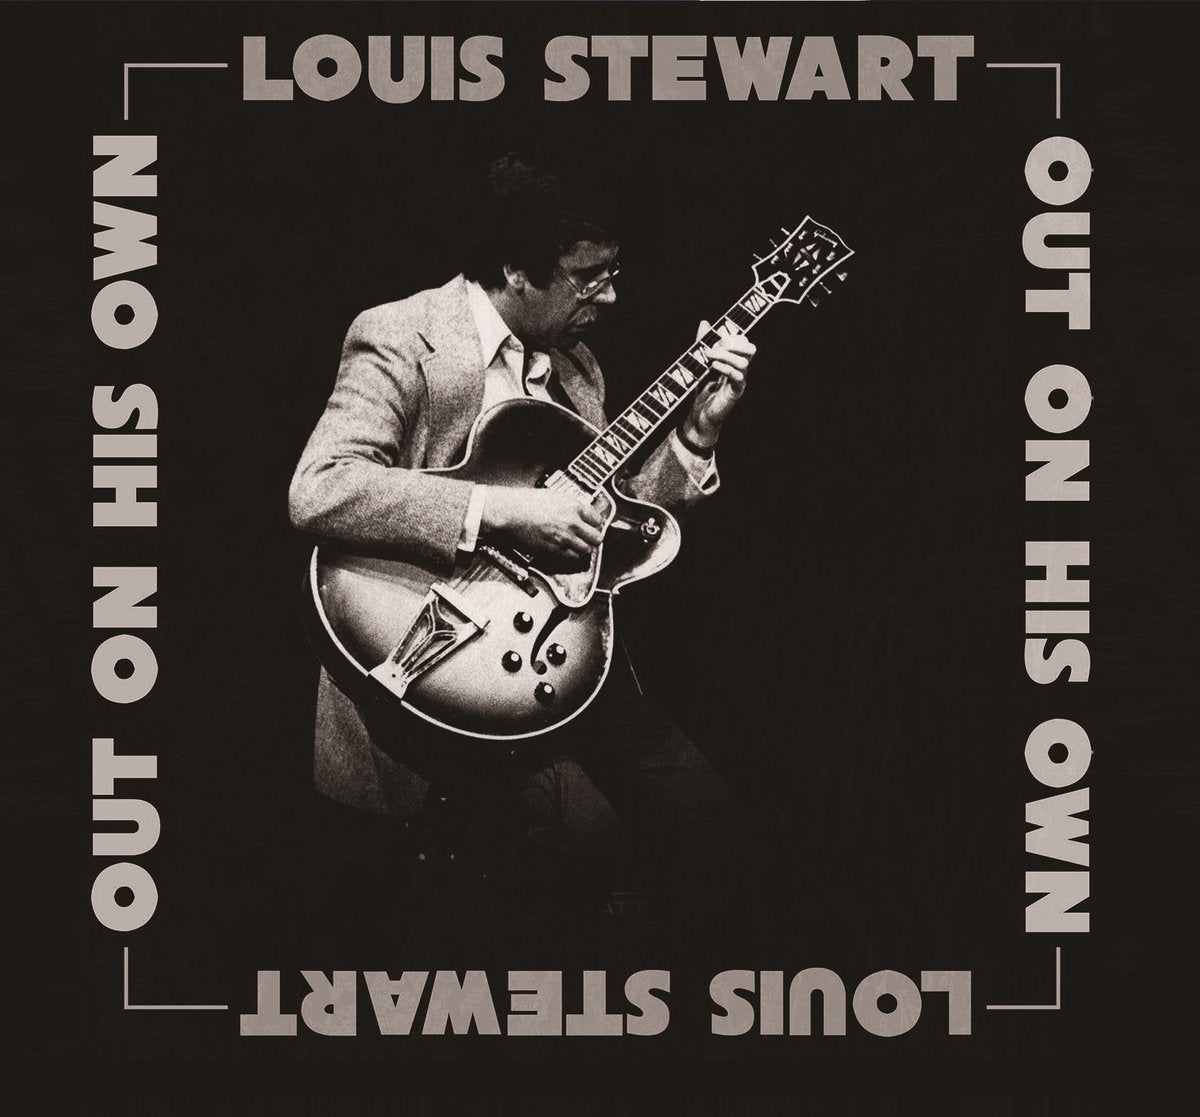 LOUIS STEWART - Out On His Own (Remastered) - LP - 180g Vinyl